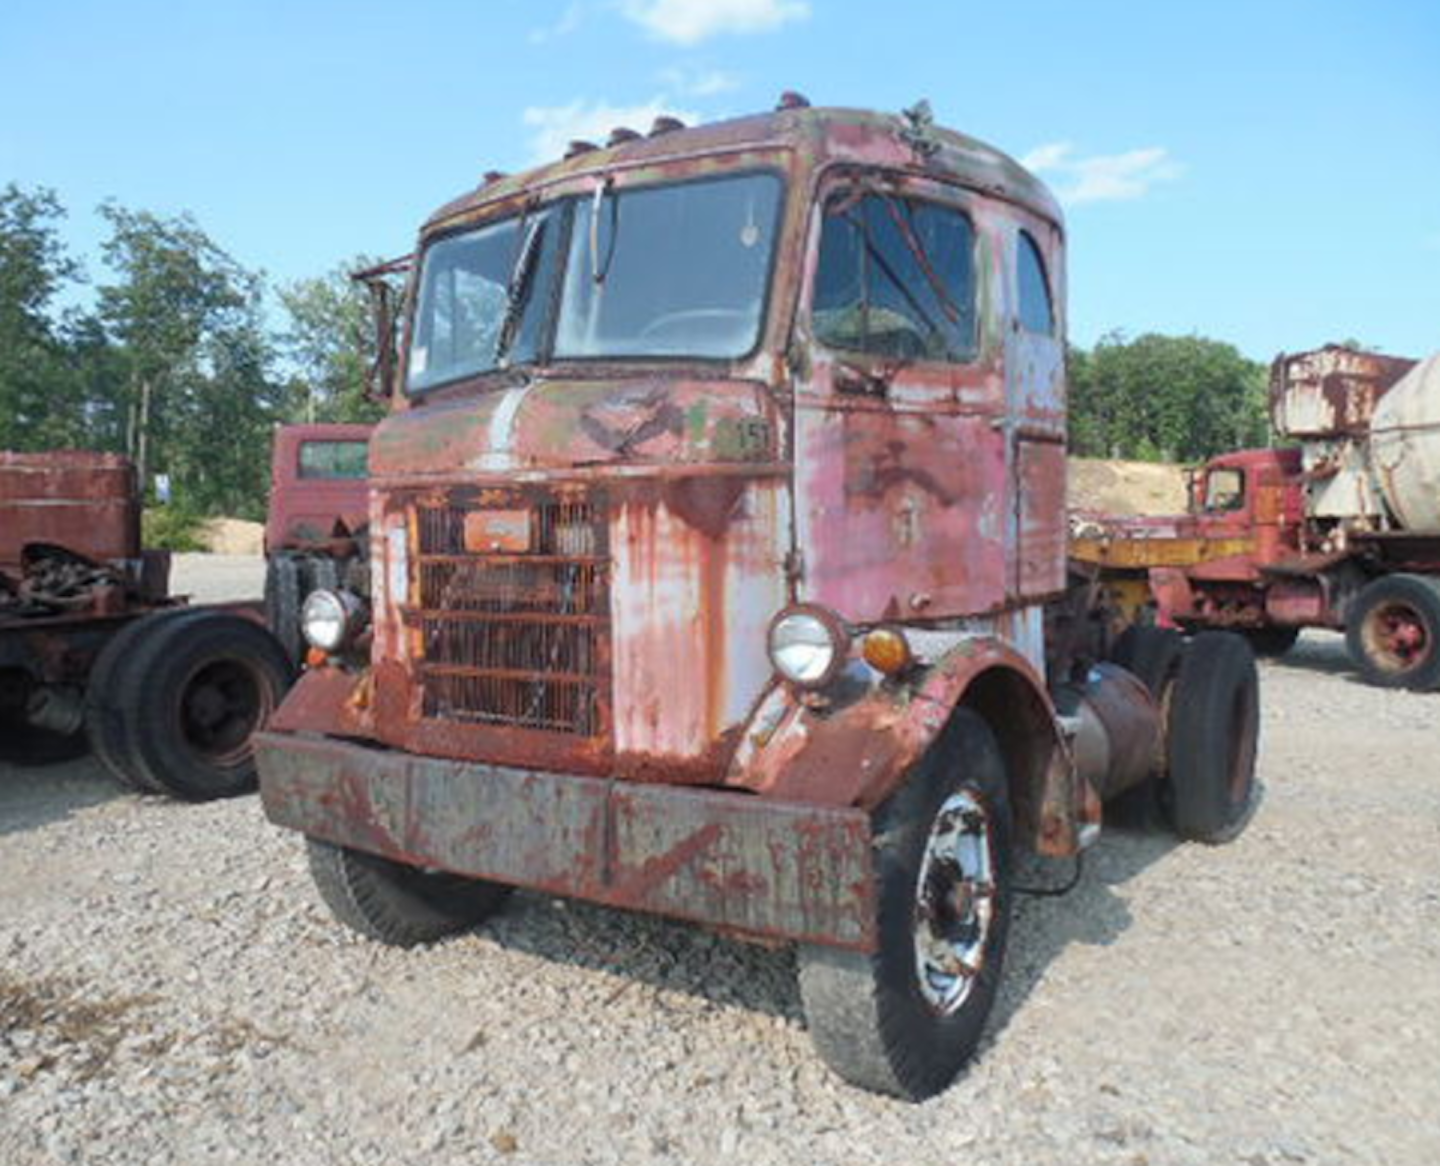 Auction scheduled for Aug. 19 to sell vintage Mack trucks Truckers News